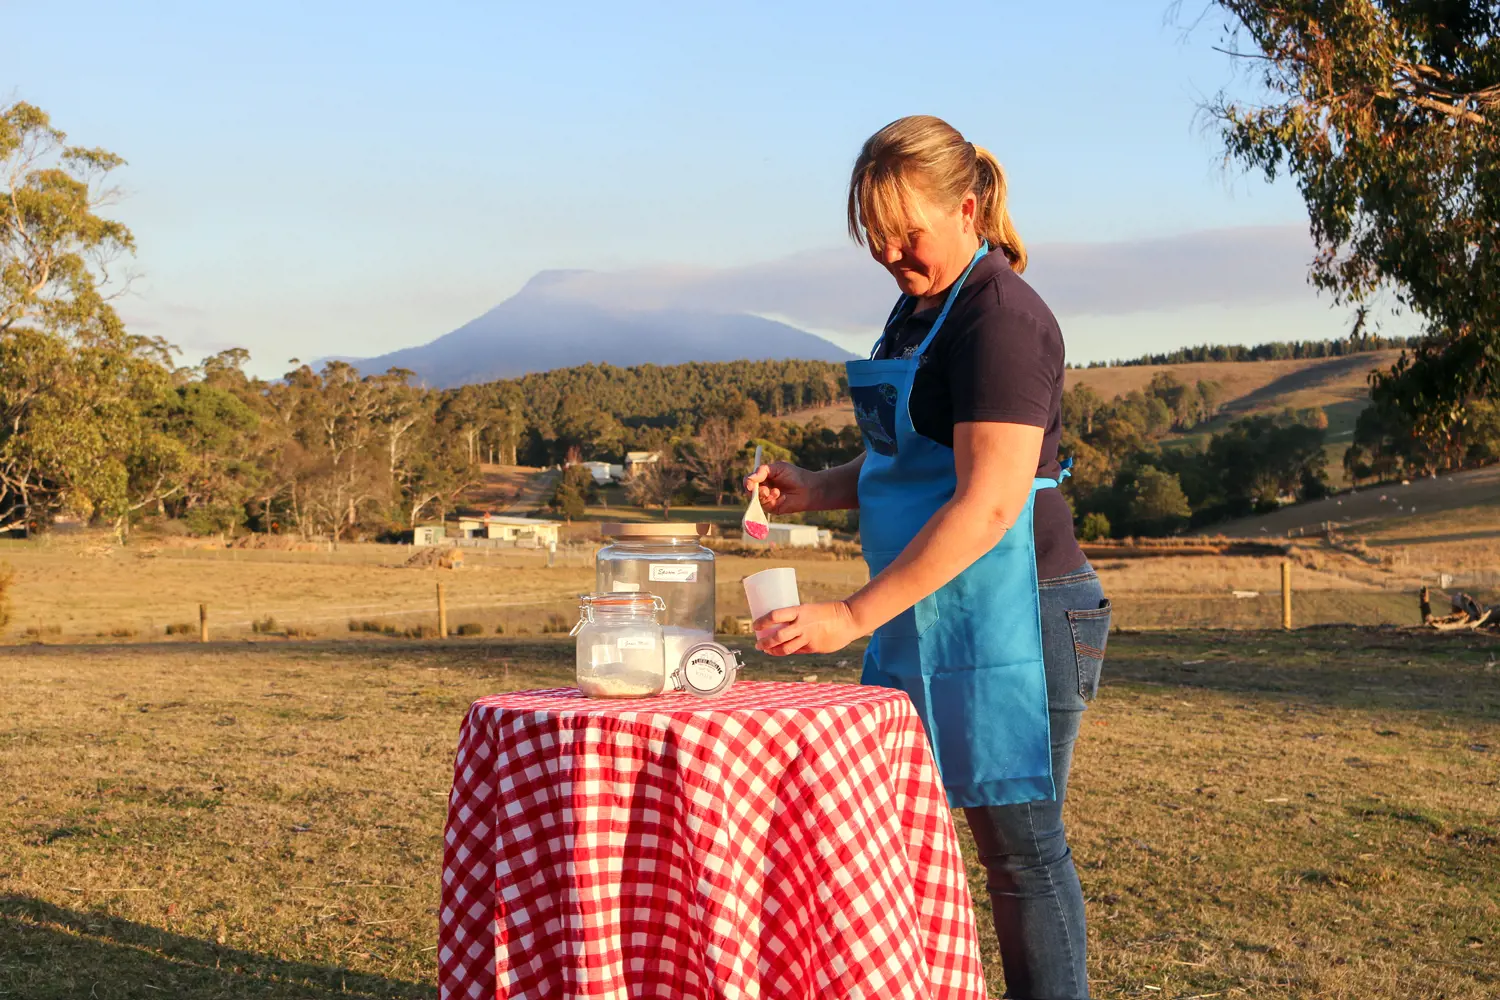 A woman wearing an apron stands in a farm field next to a table with the ingredients for making soap.